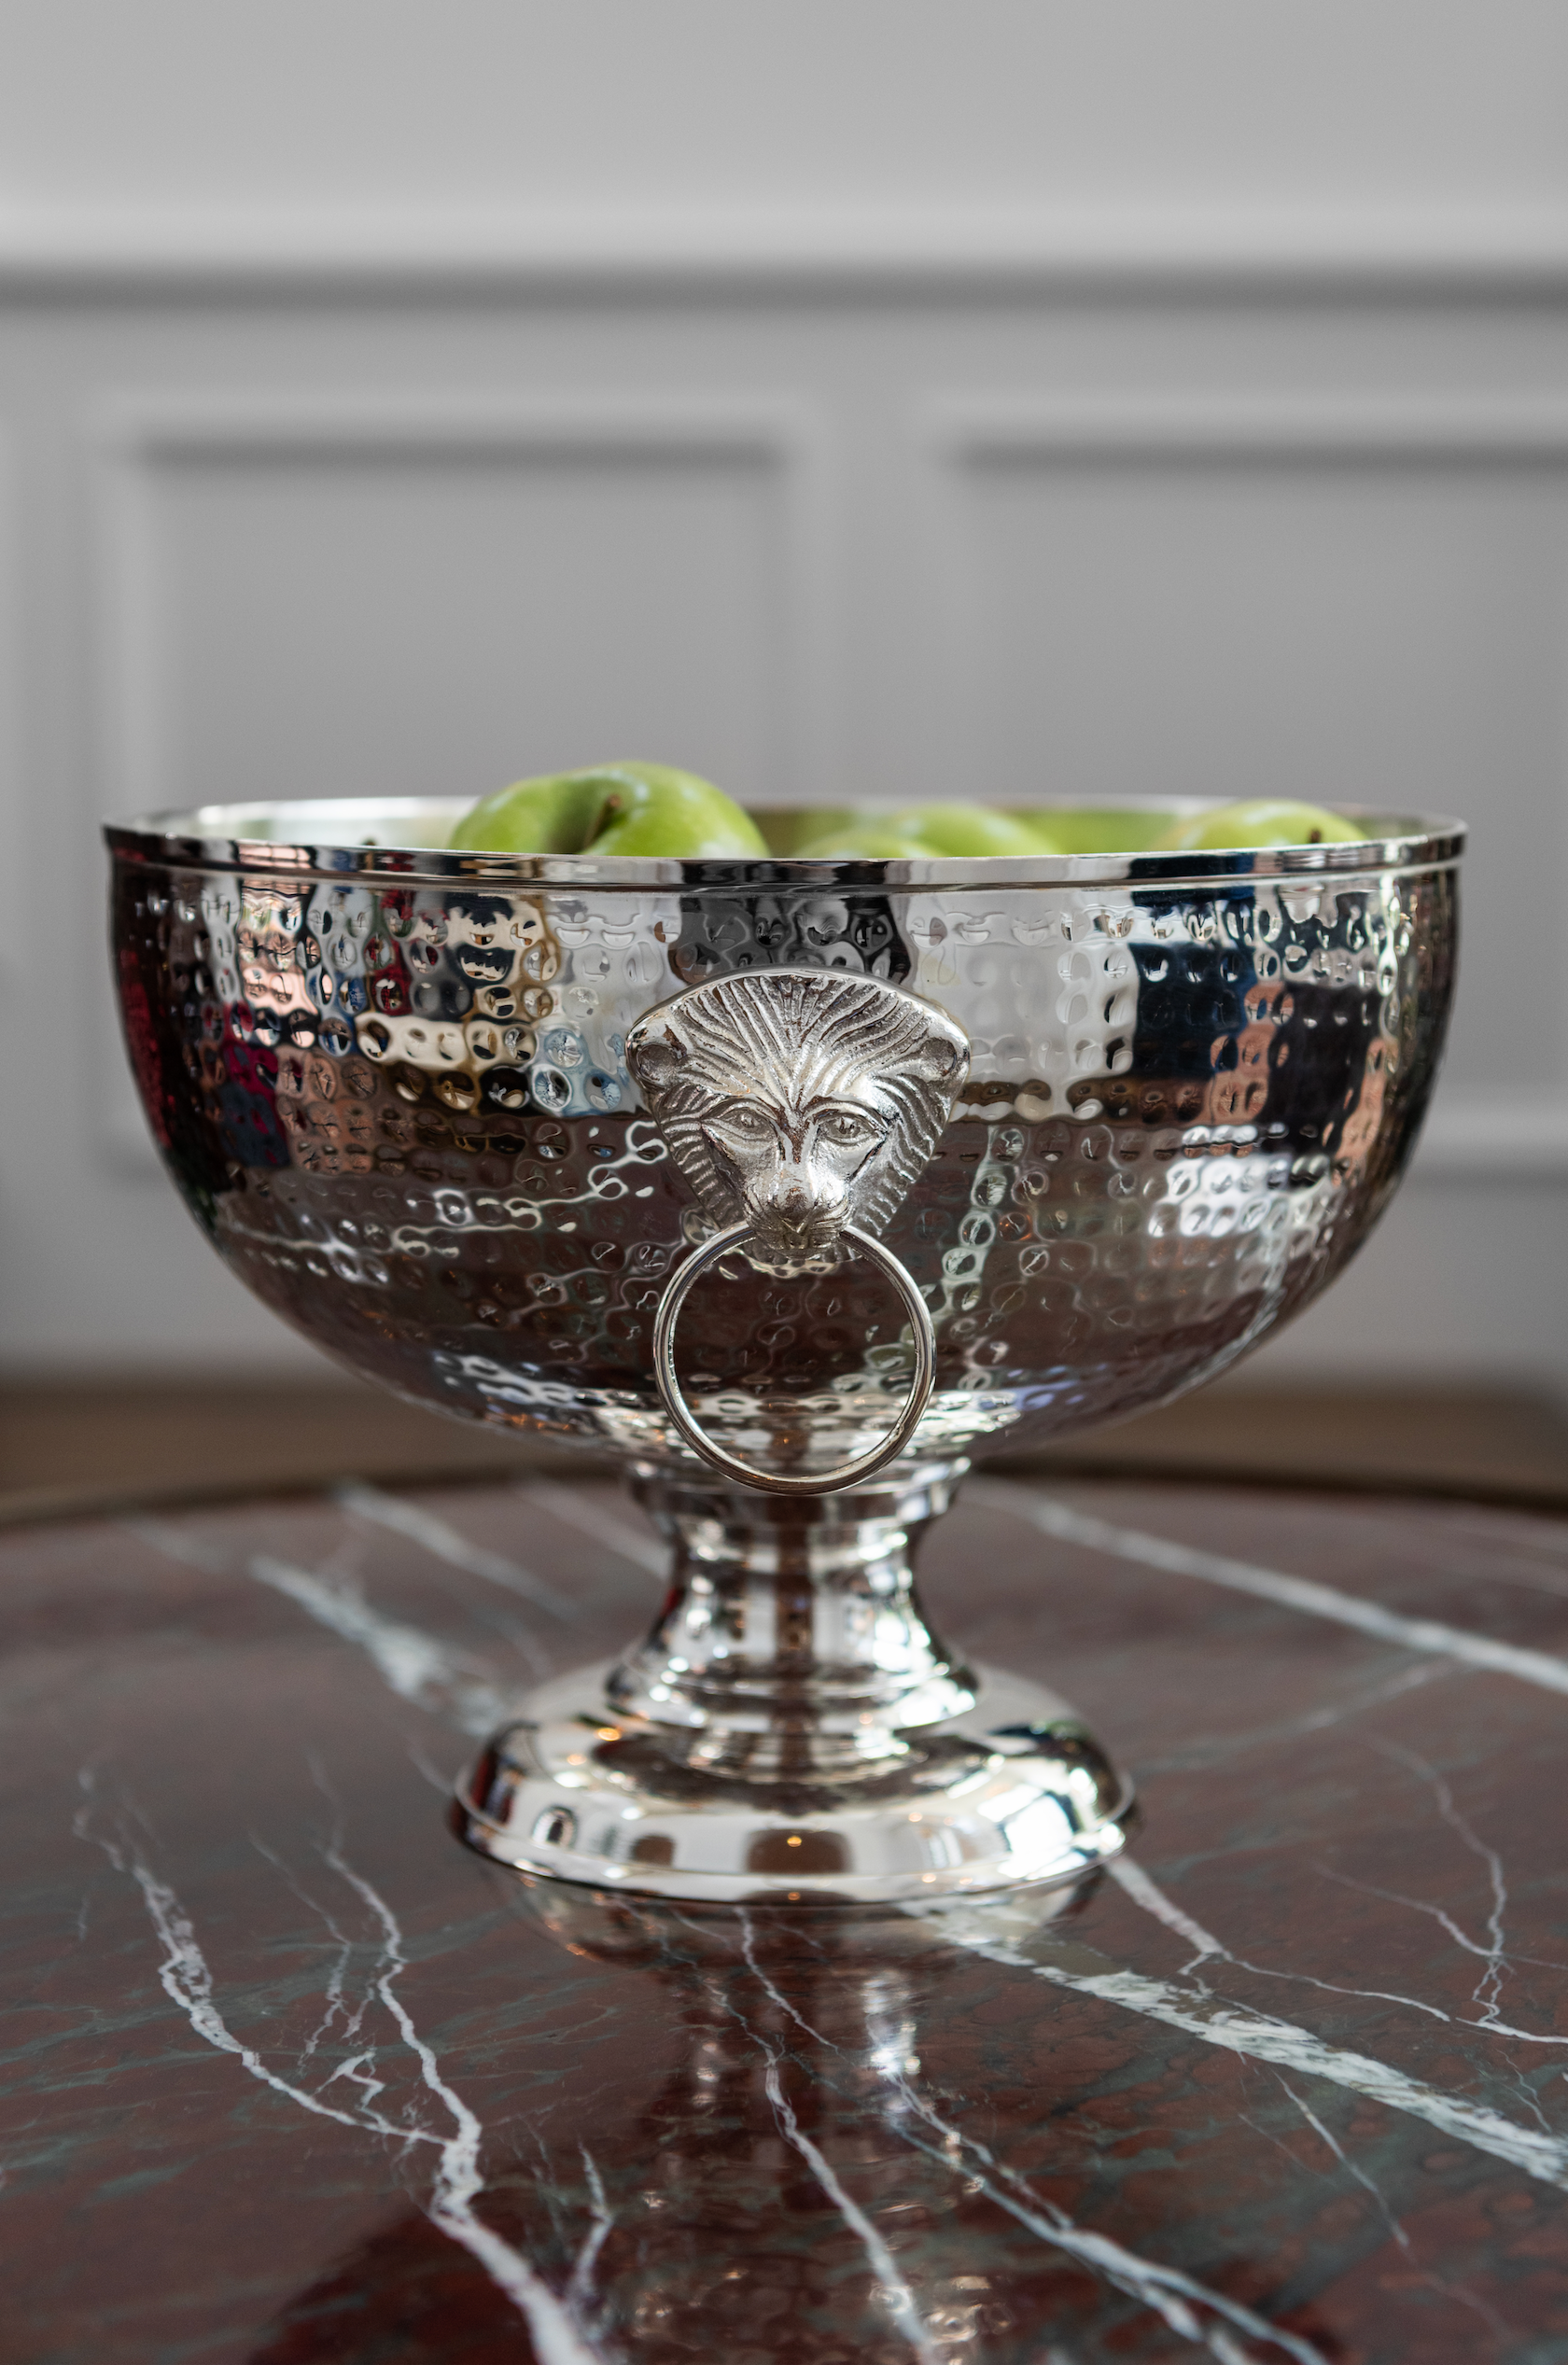 SILVER PLATED ASLON BOWL